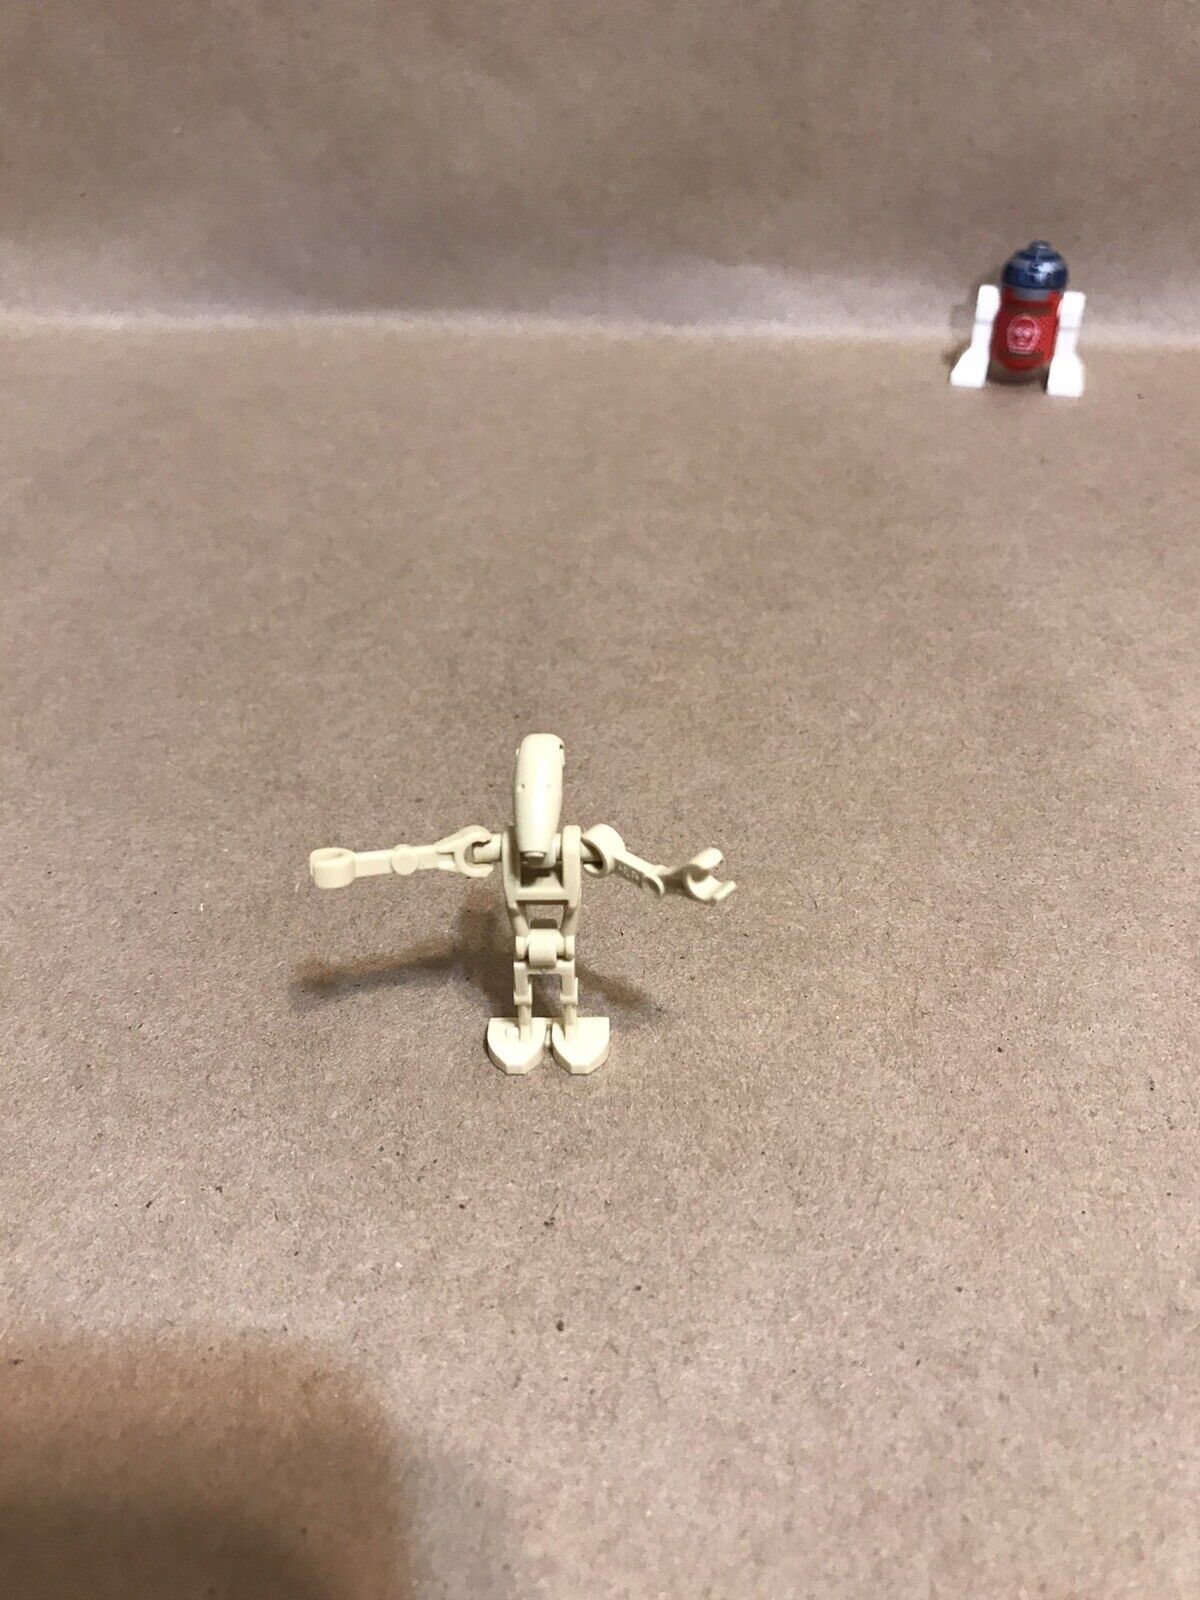 Blessed Battle Droid Lego Star Wars